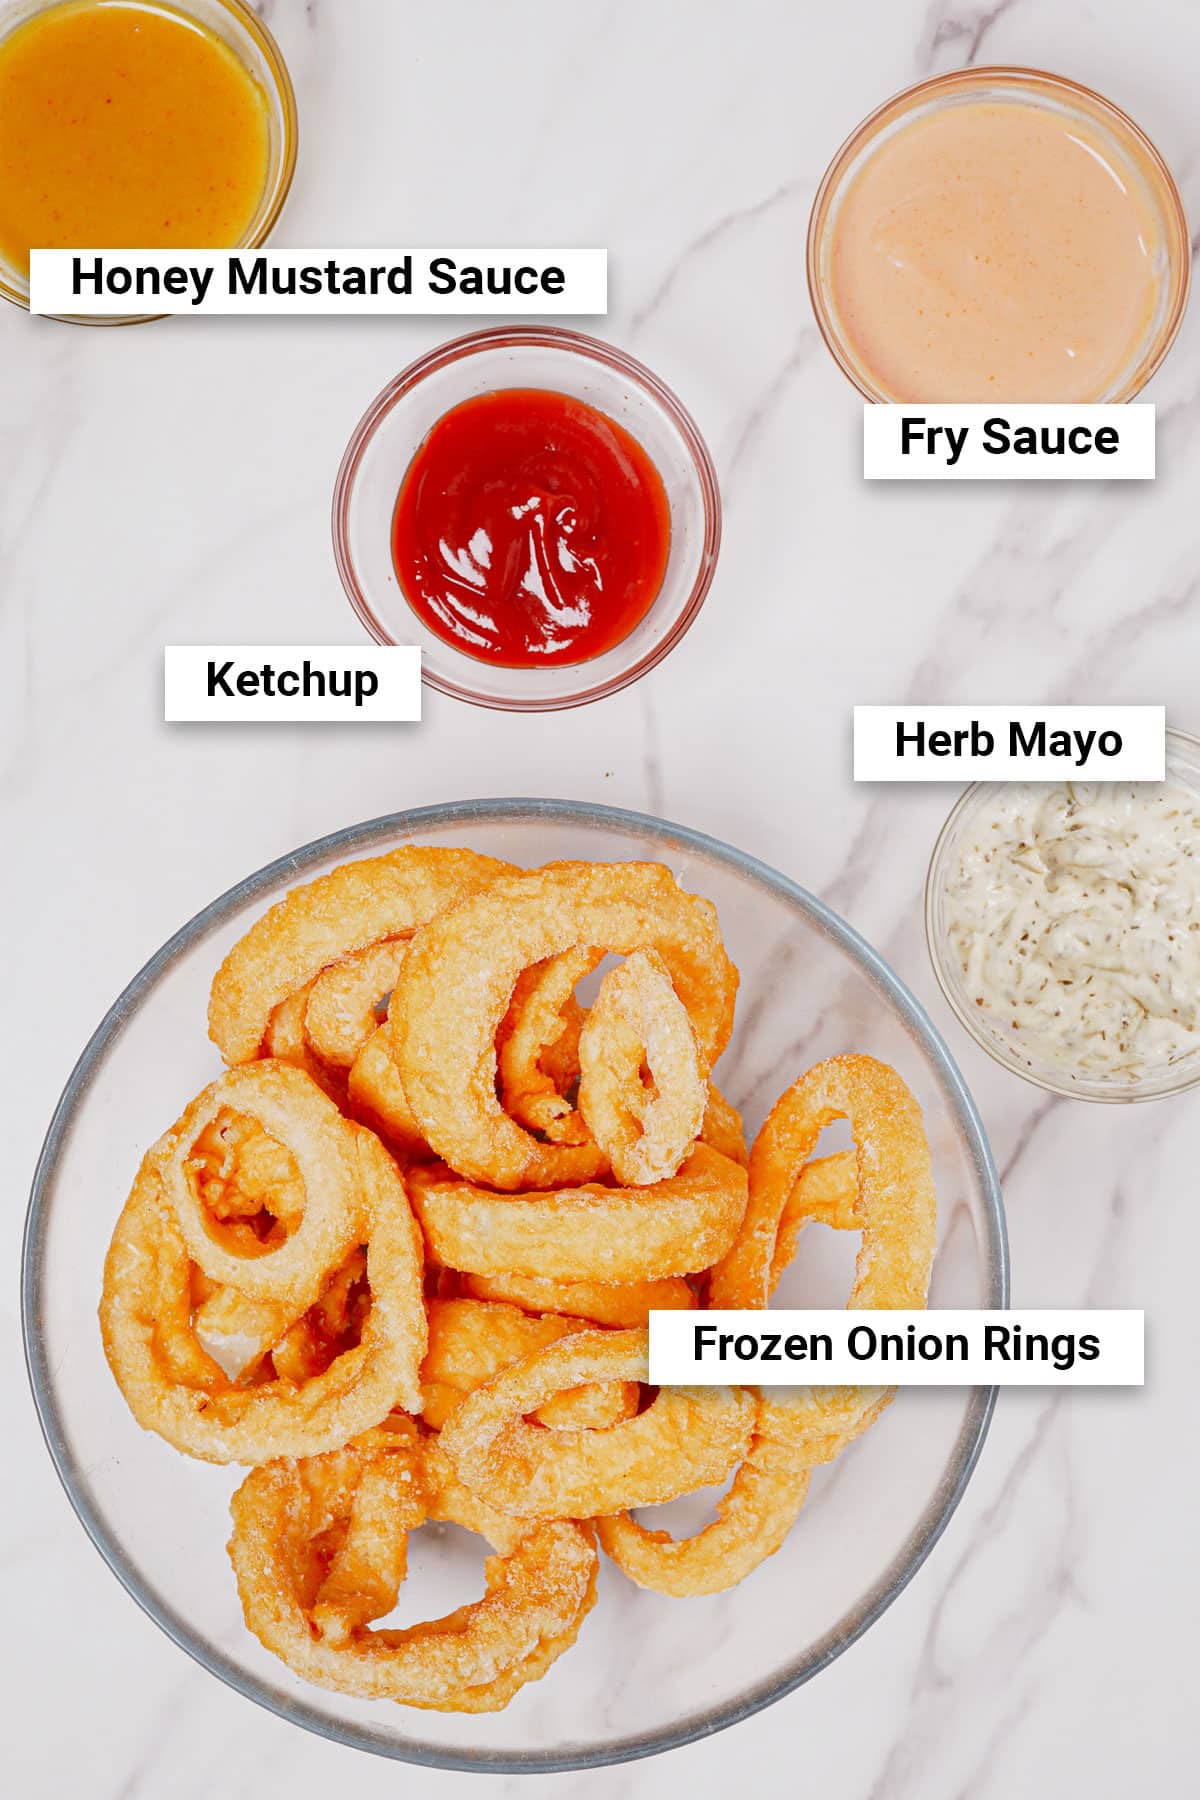 Frozen onion rings with 4 sauce options: honey mustard, herb mayo, ketchup, traditional fry sauce.